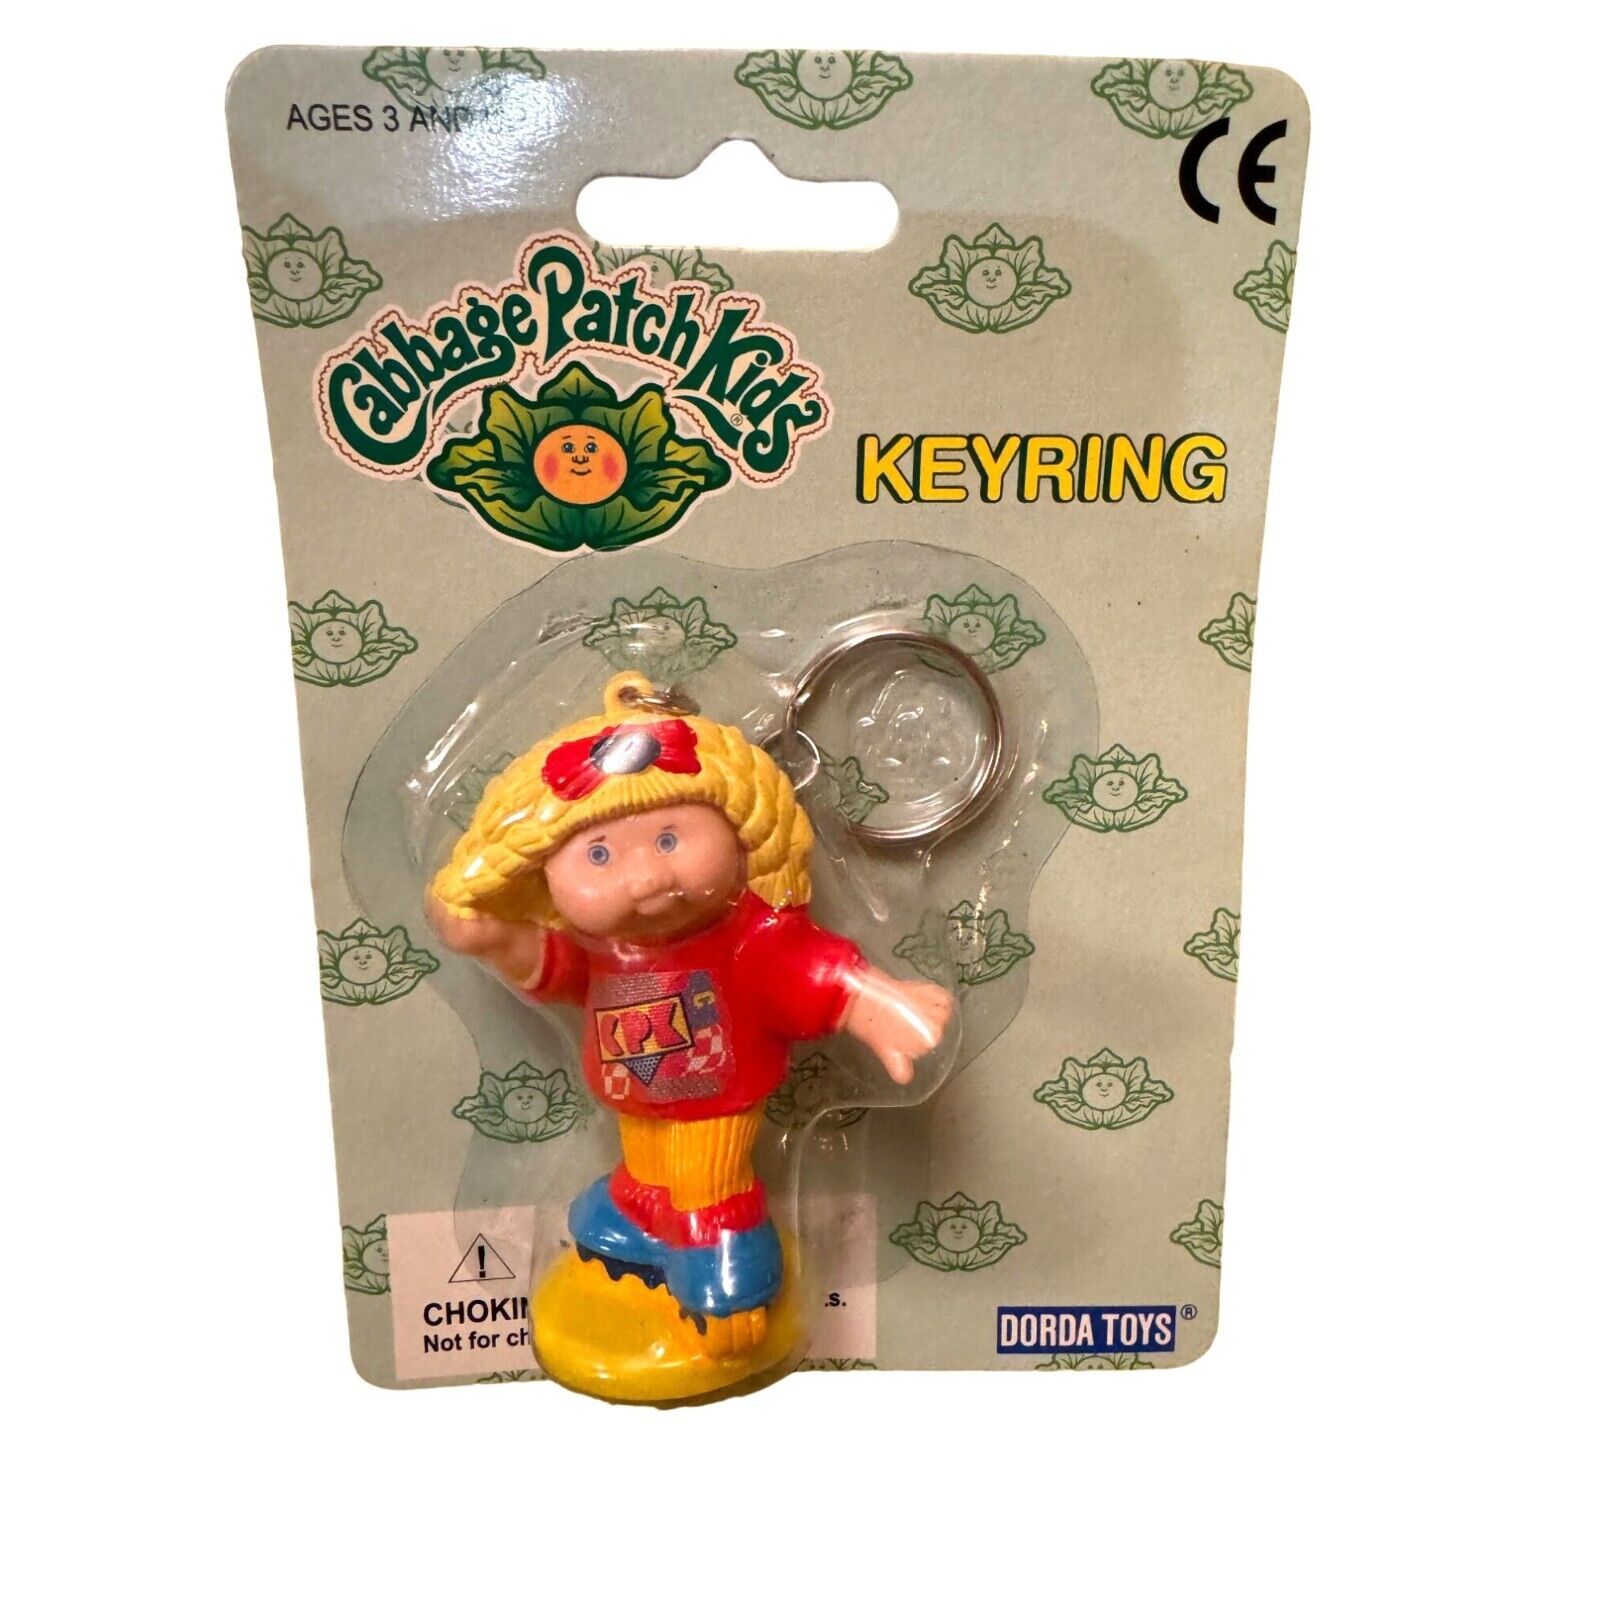 Vintage 1997 Cabbage Patch Keychain- Rollerblader in Red- New in package